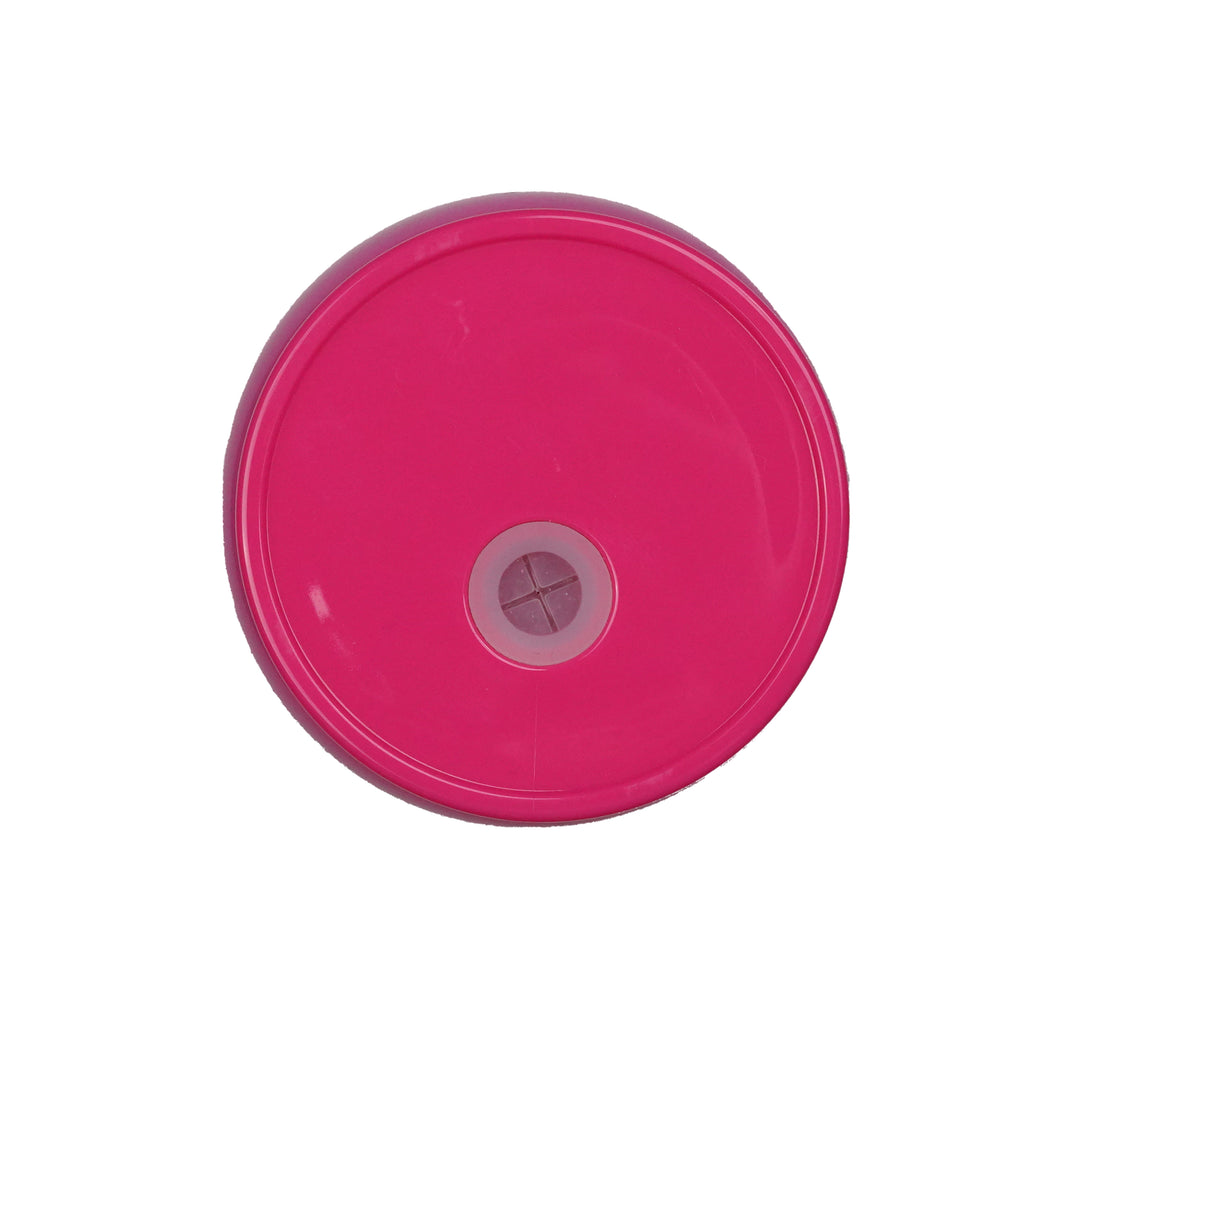 Glass Can Single Wall - Shimmer Hot Pink